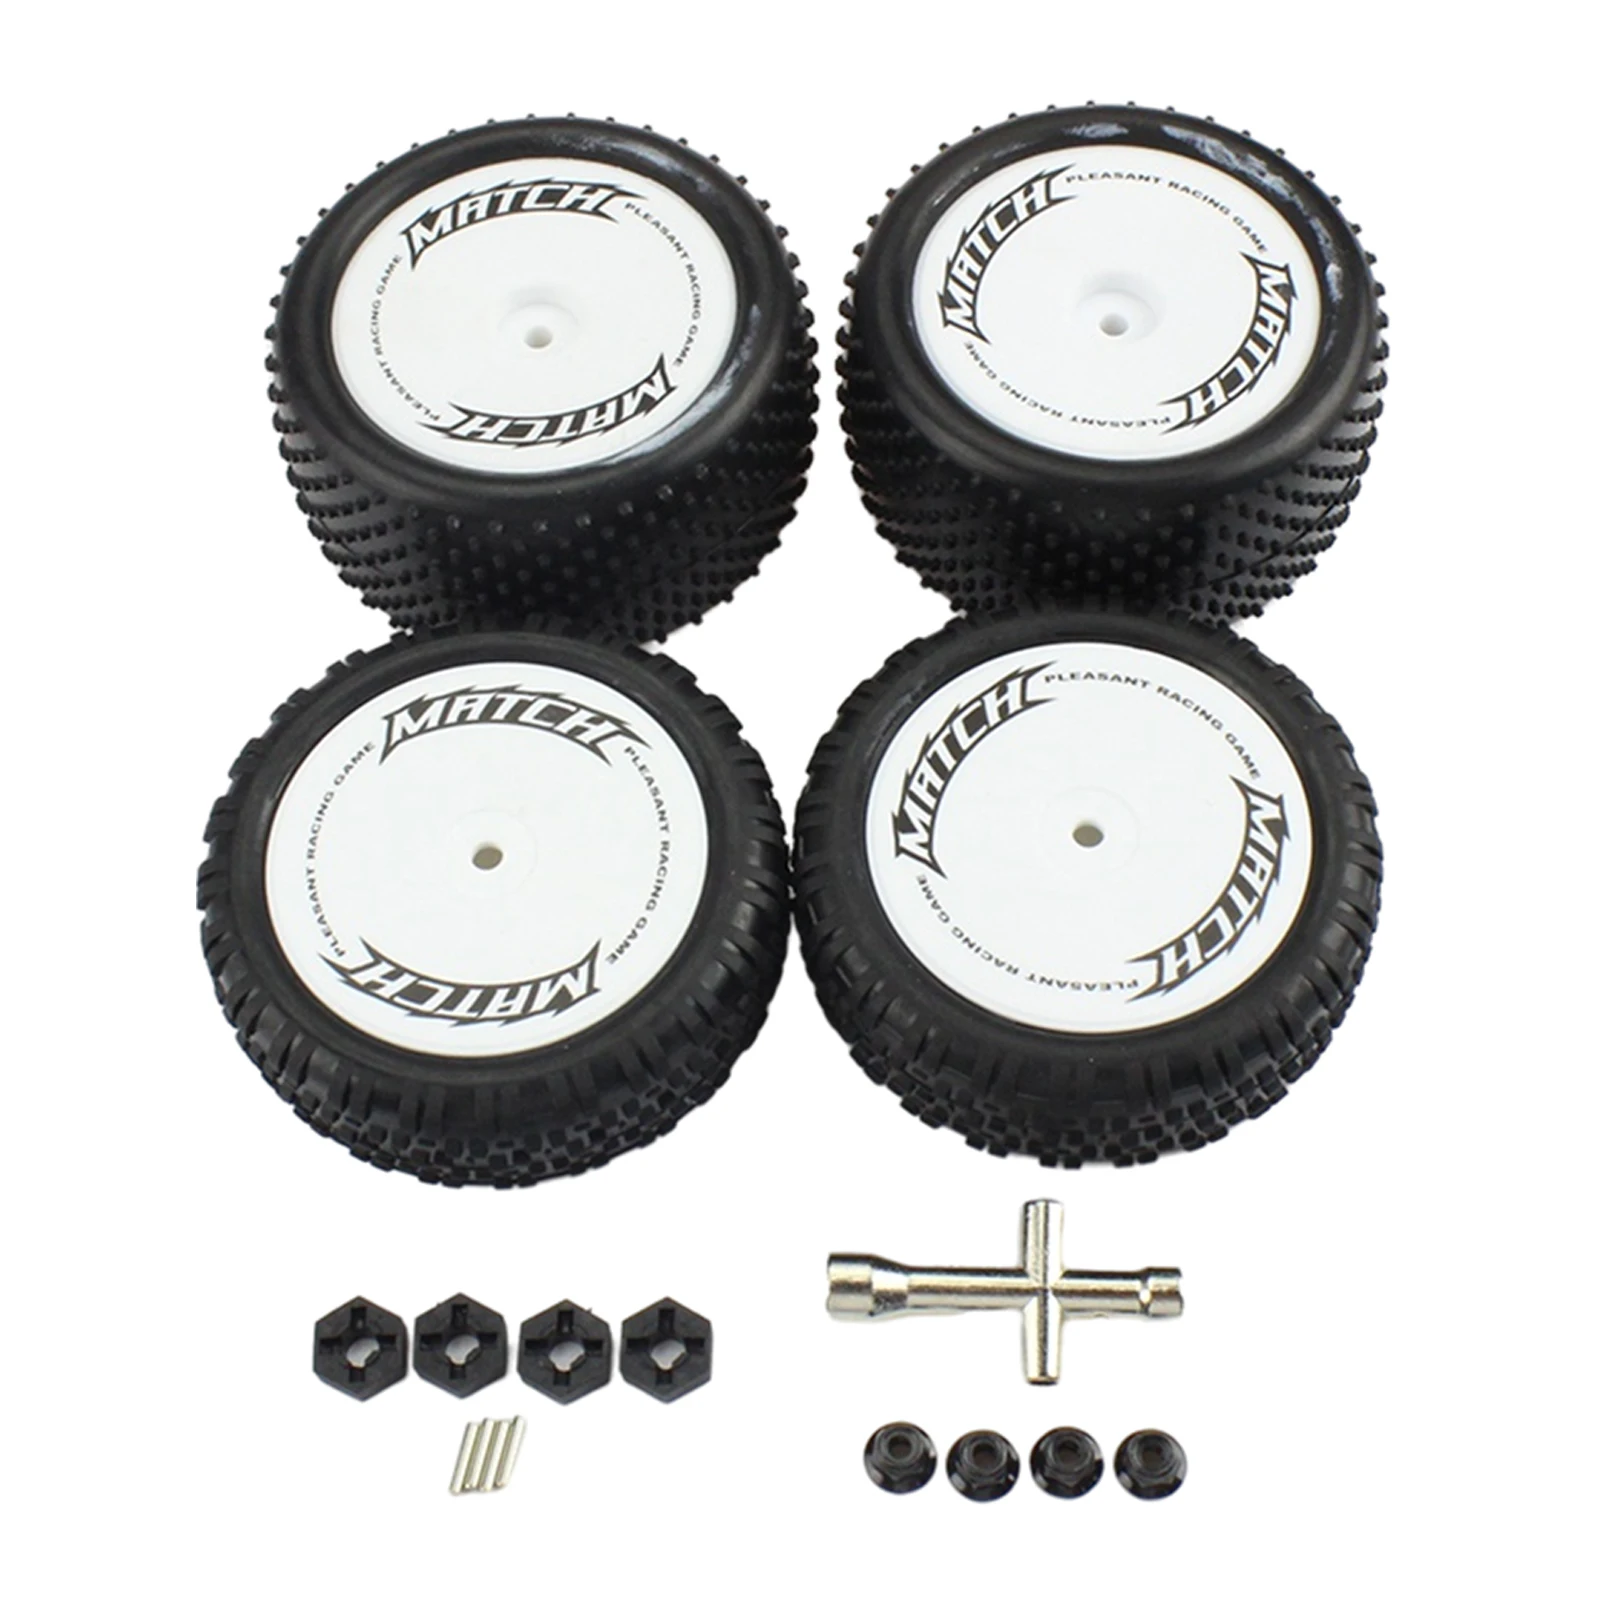 4Pack of 82.4mm Front and Rear Wheel Tires w/ Wrench Accessories for WLtoys 104001 Off Road Vehicles Buggy DIY Parts